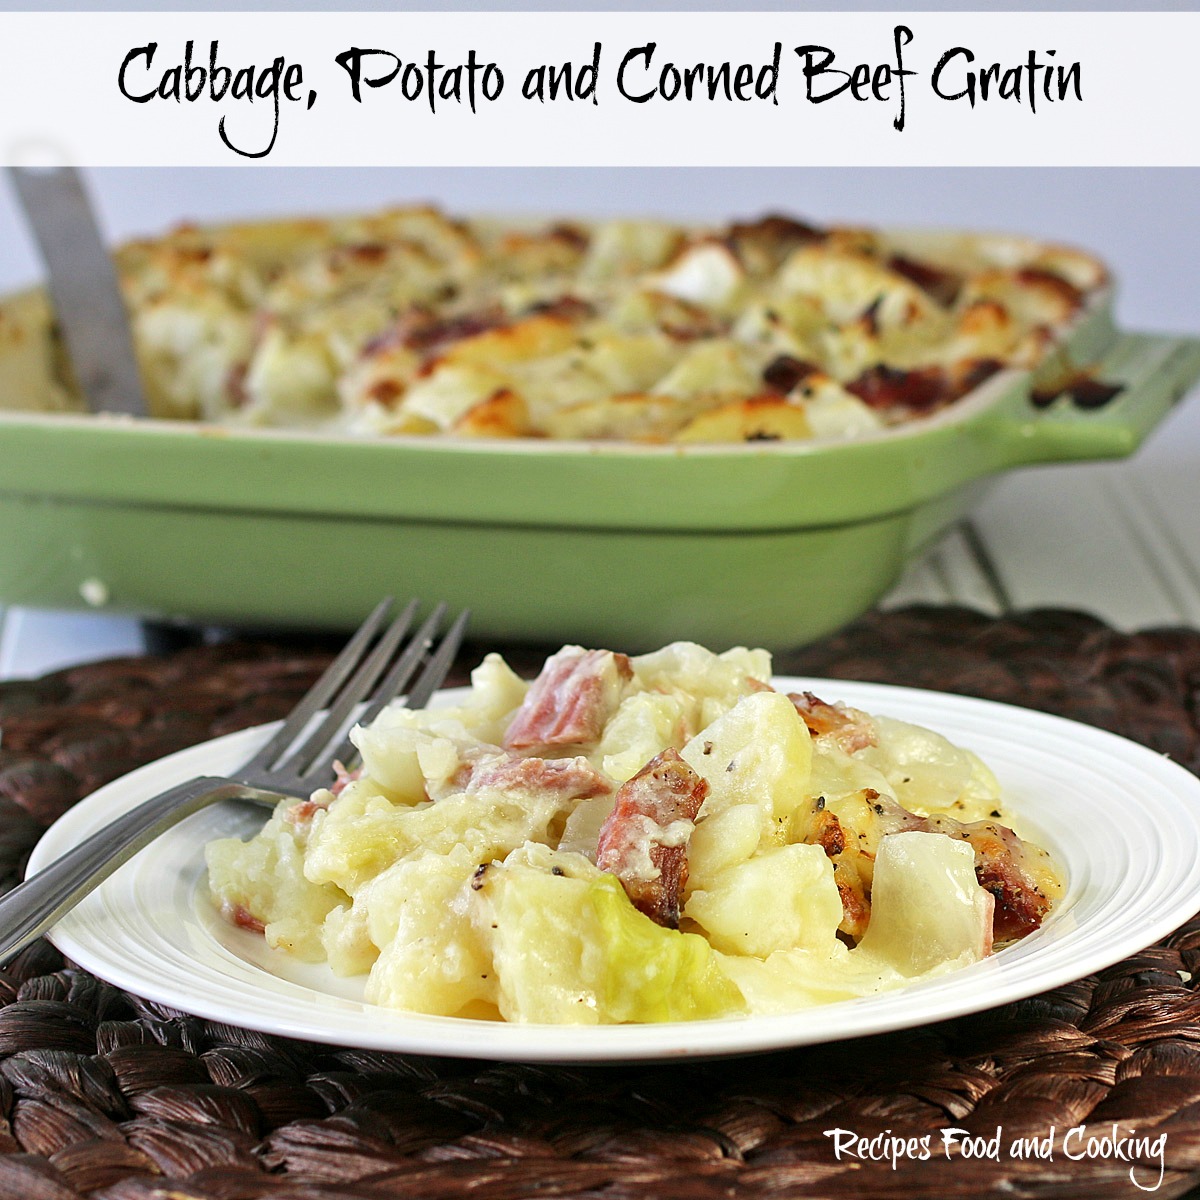 Cabbage, Potato and Corned Beef Gratin